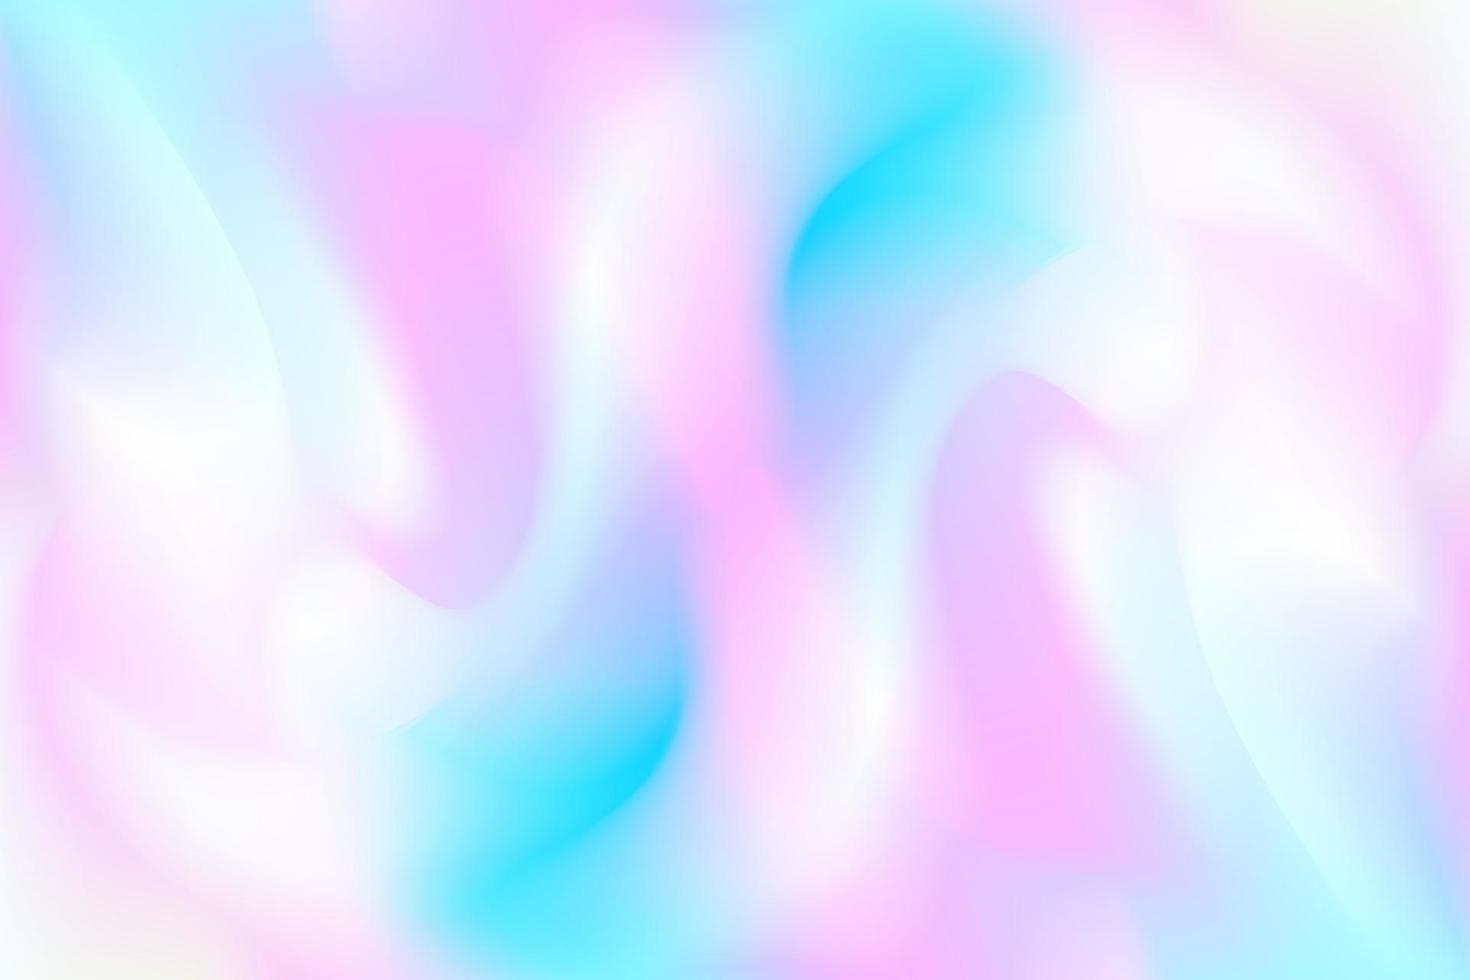 A pastel colored abstract background - Iridescent